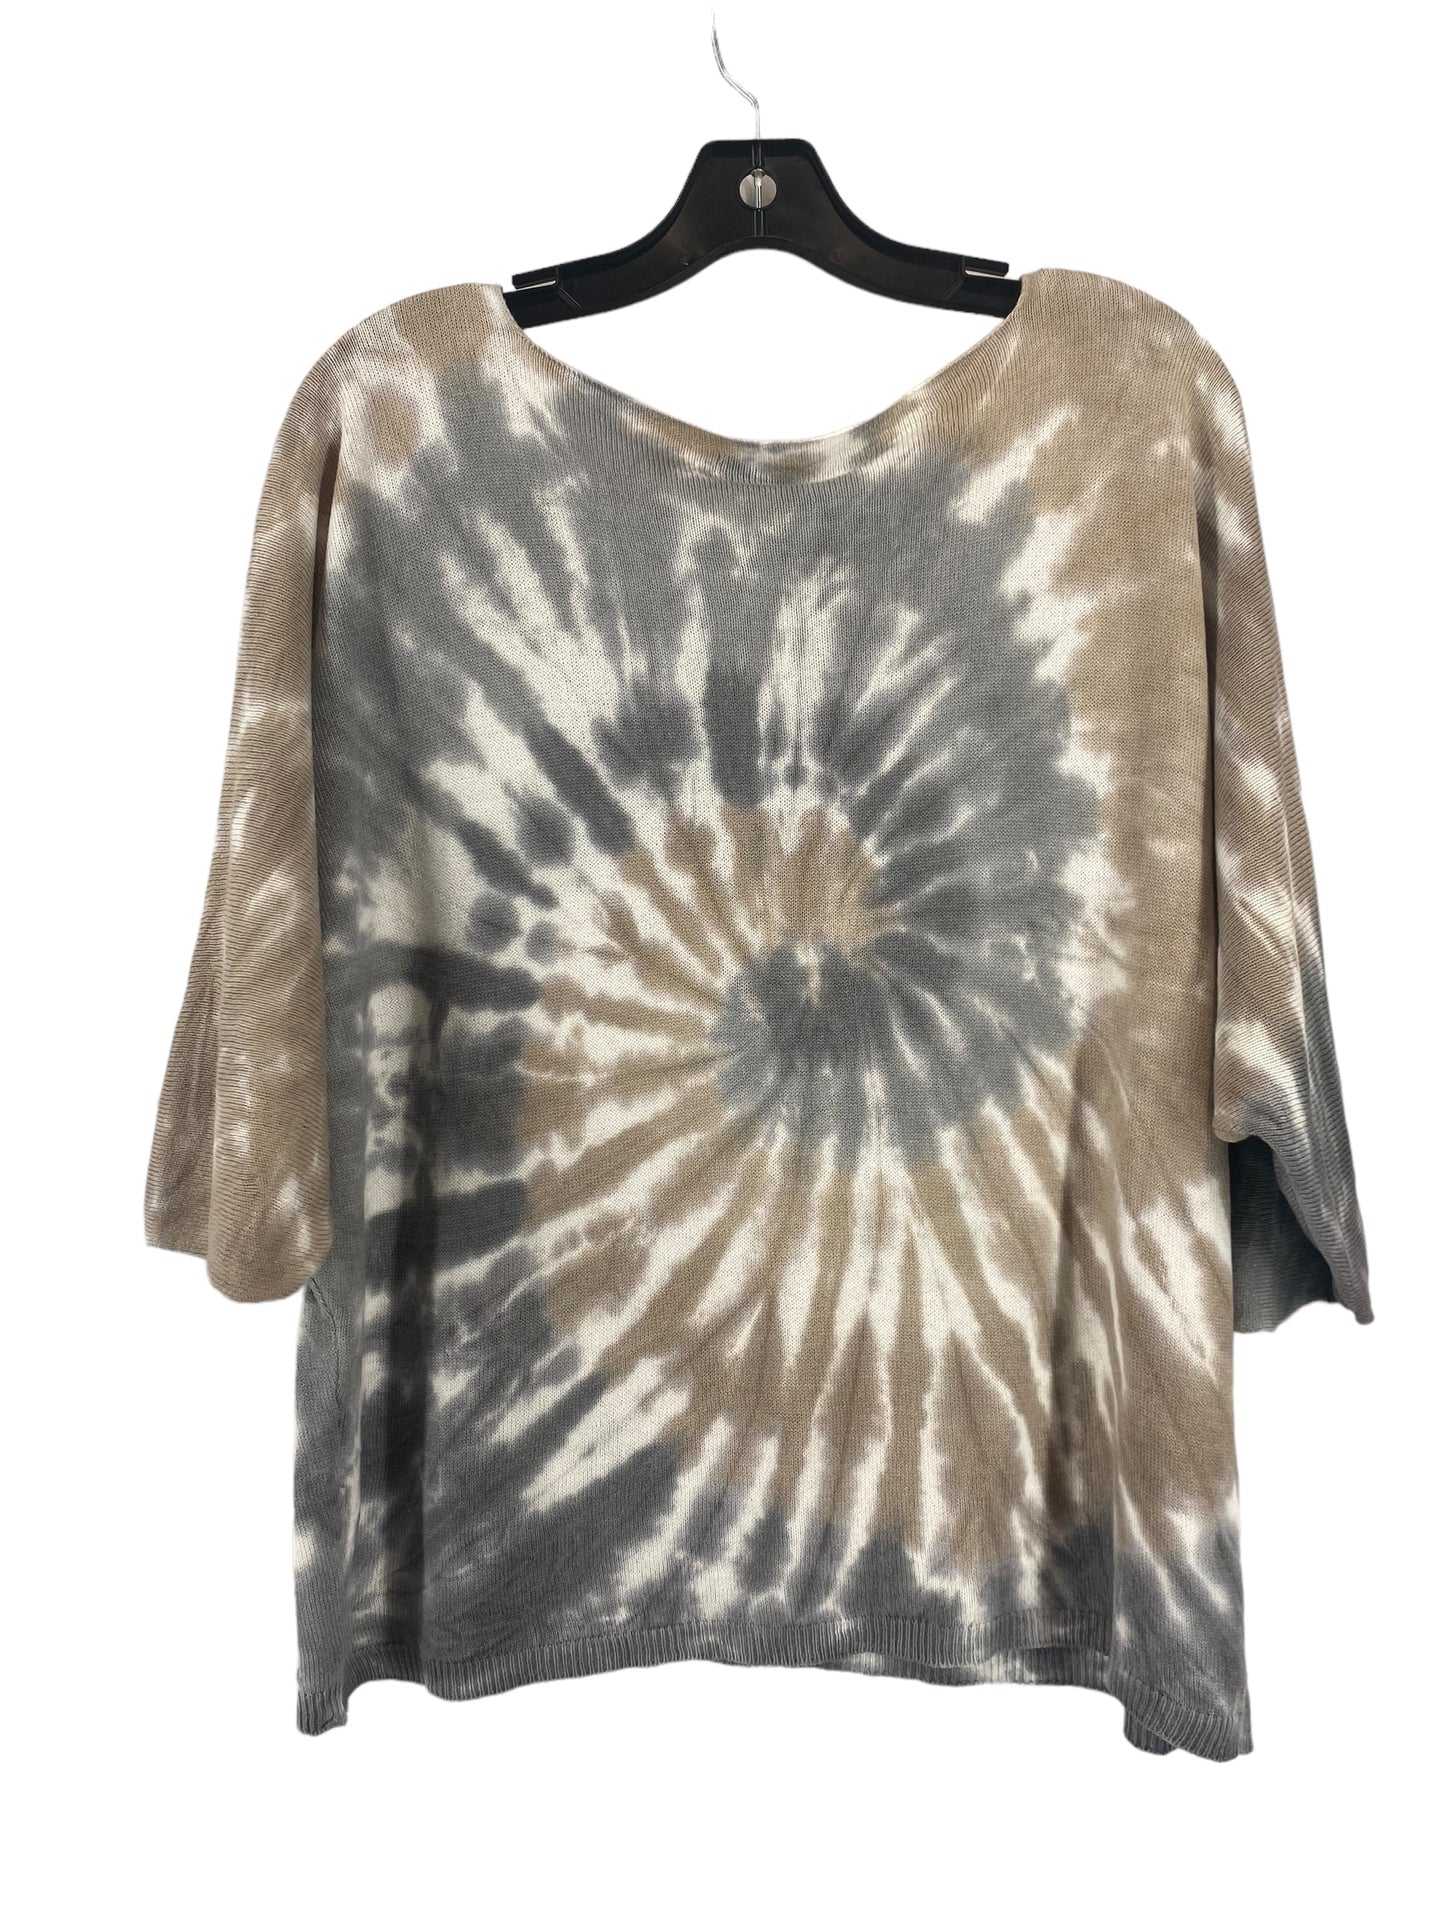 Tie Dye Print Top Short Sleeve Clothes Mentor, Size S